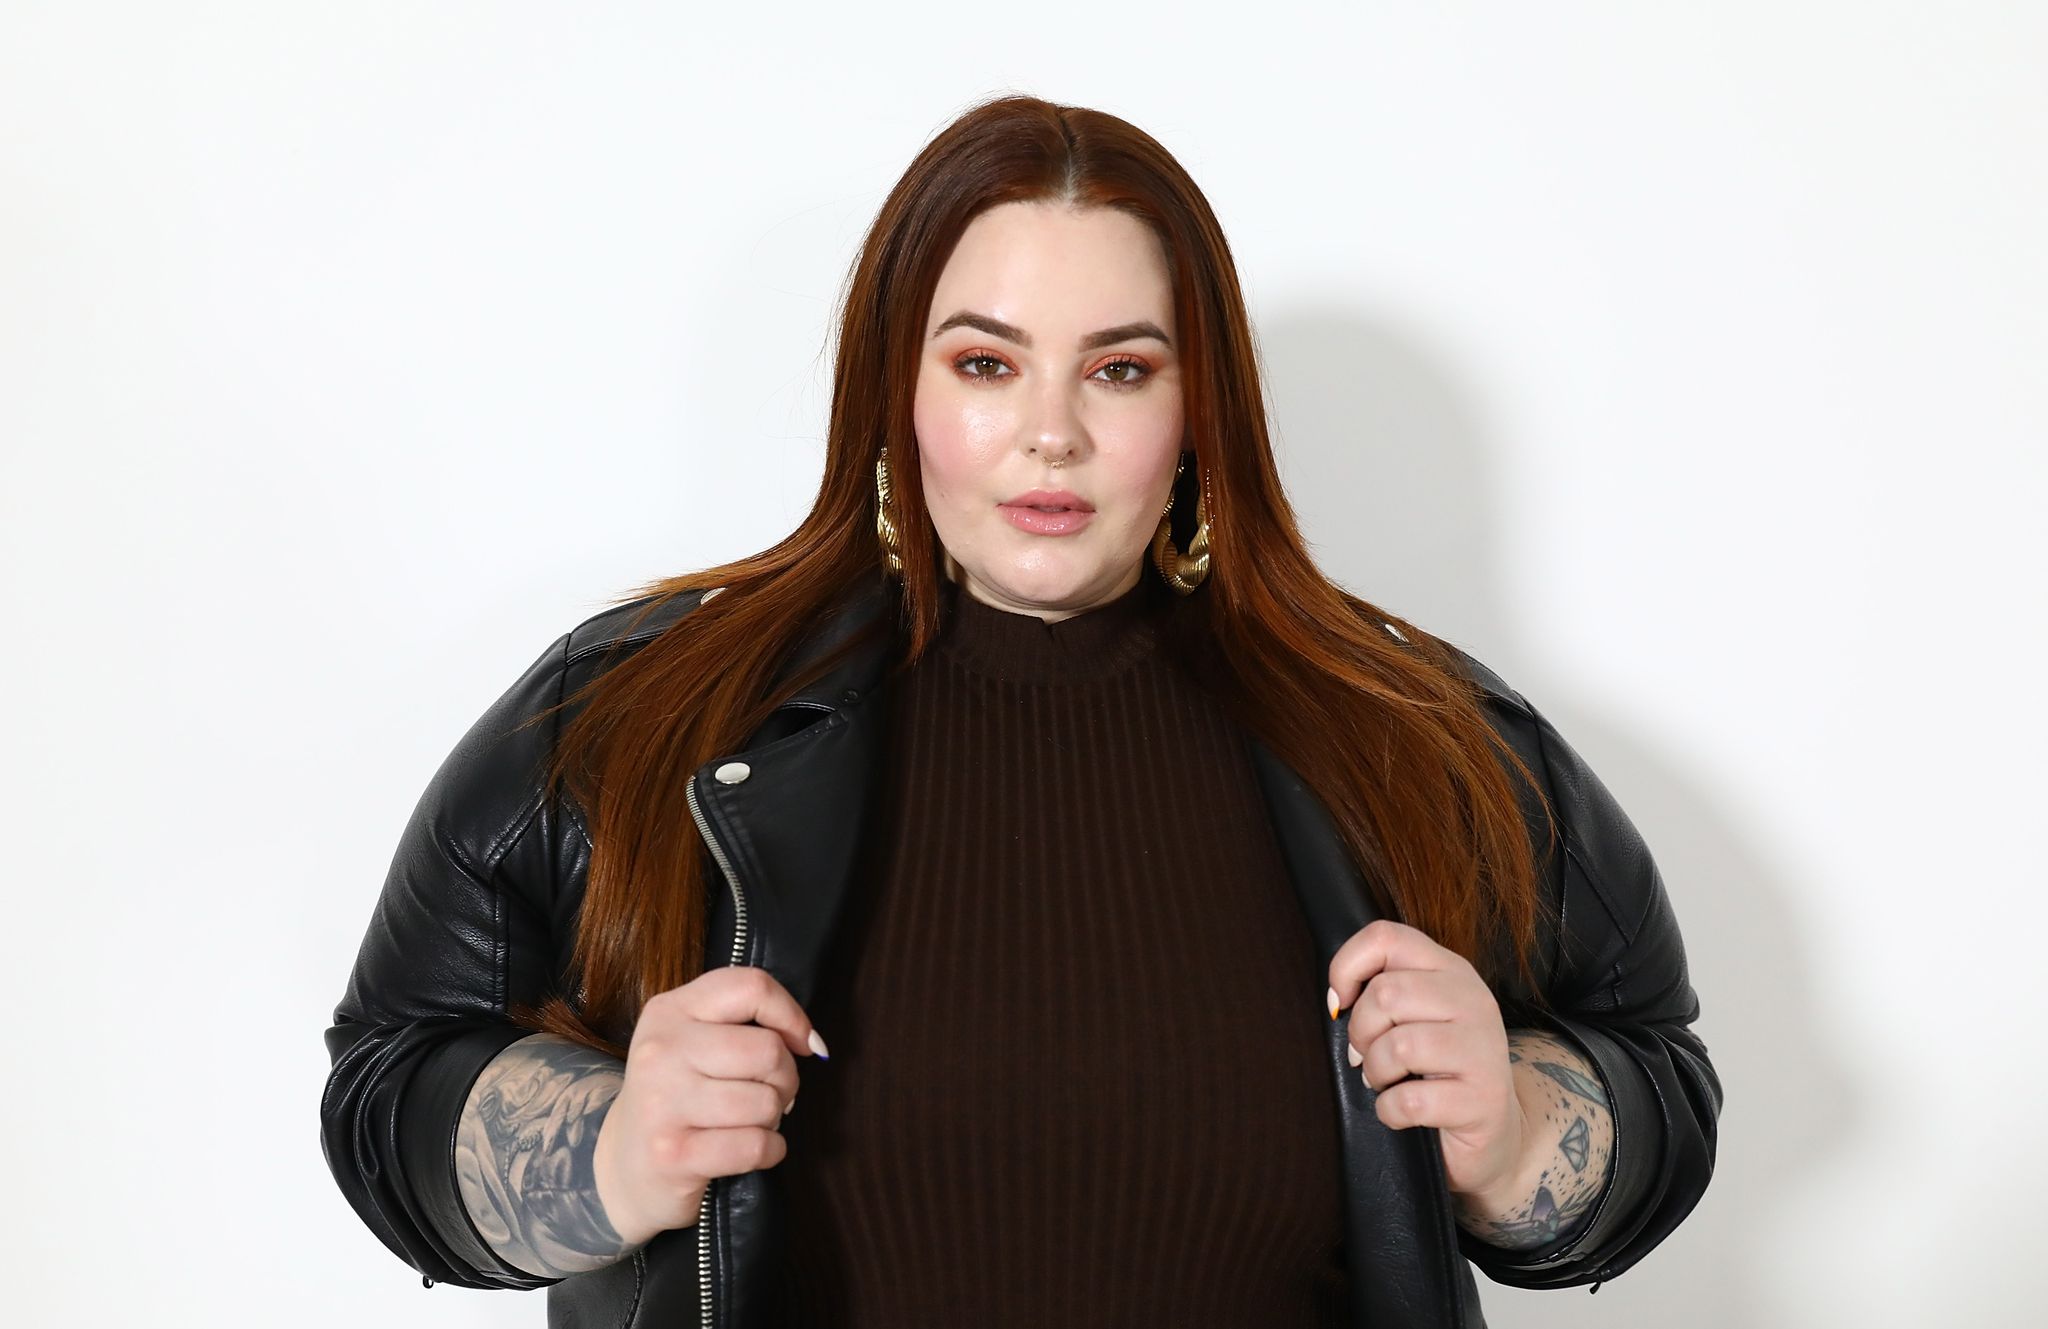 Tess Holliday On Body Positivity, Plus-Size Models And Fashion Week